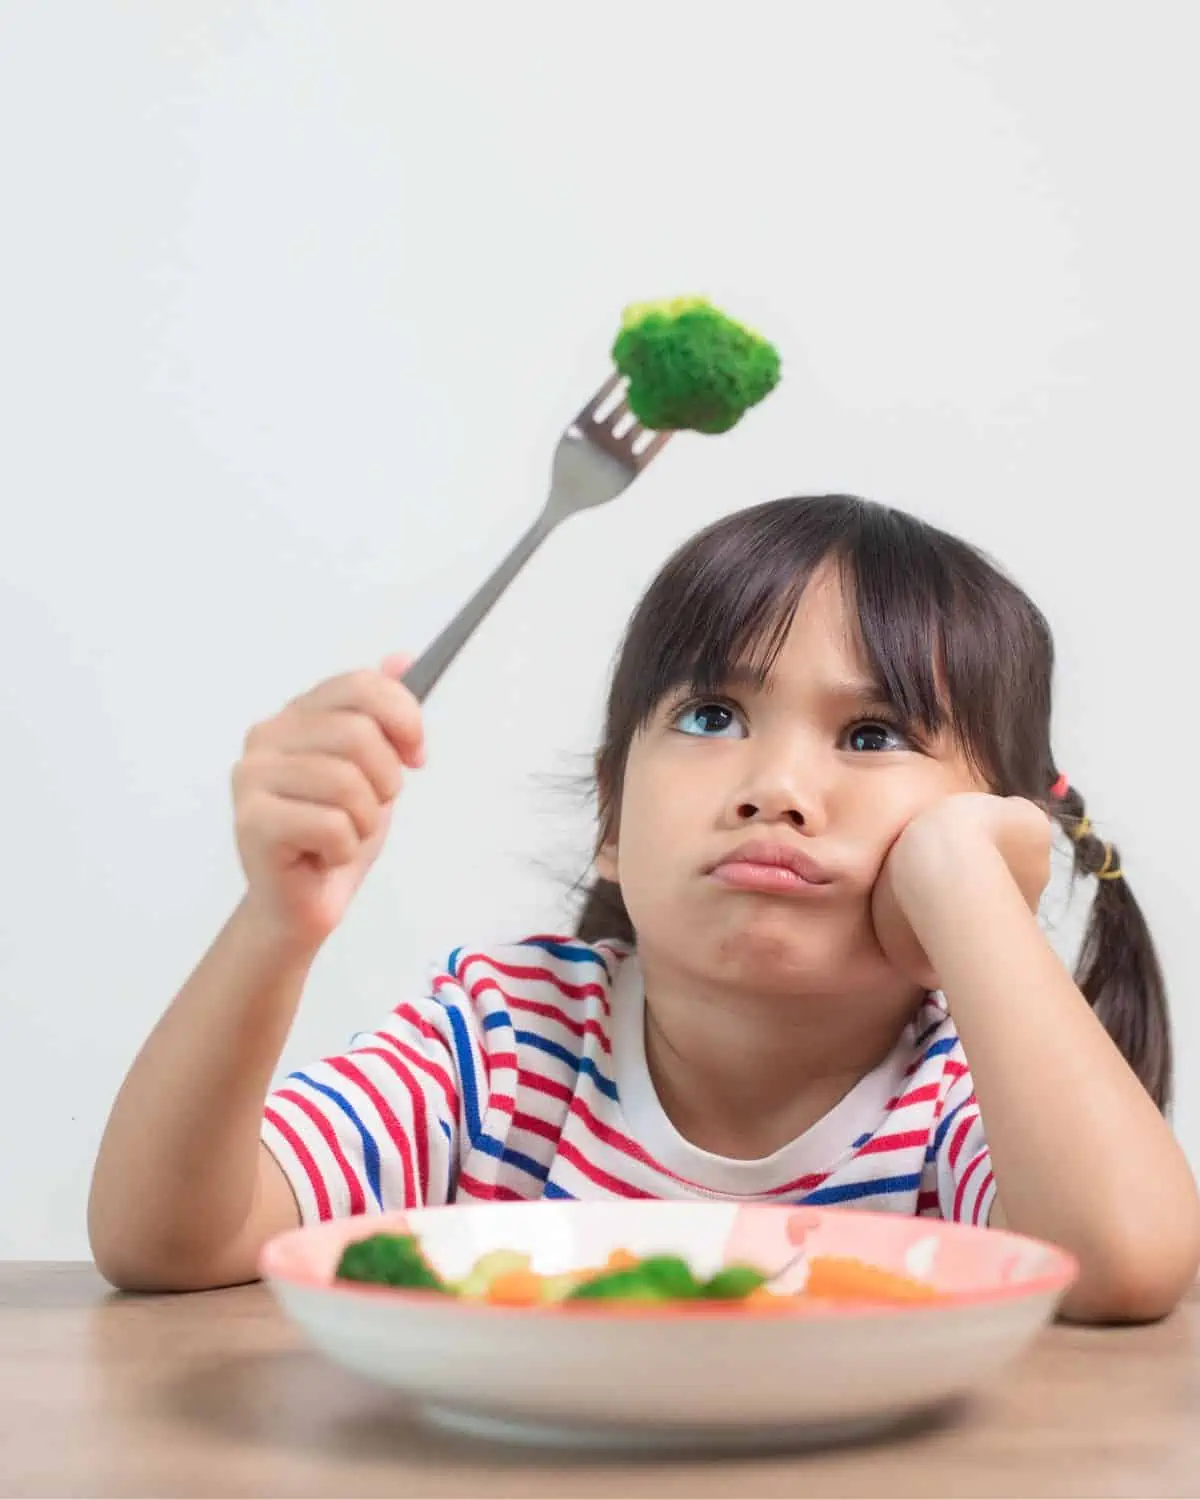 Sad toddler girl holding a fork with broccoli, showing reluctance to eat her meal, image is for a recipe post on tips and meal ideas for picky eaters.